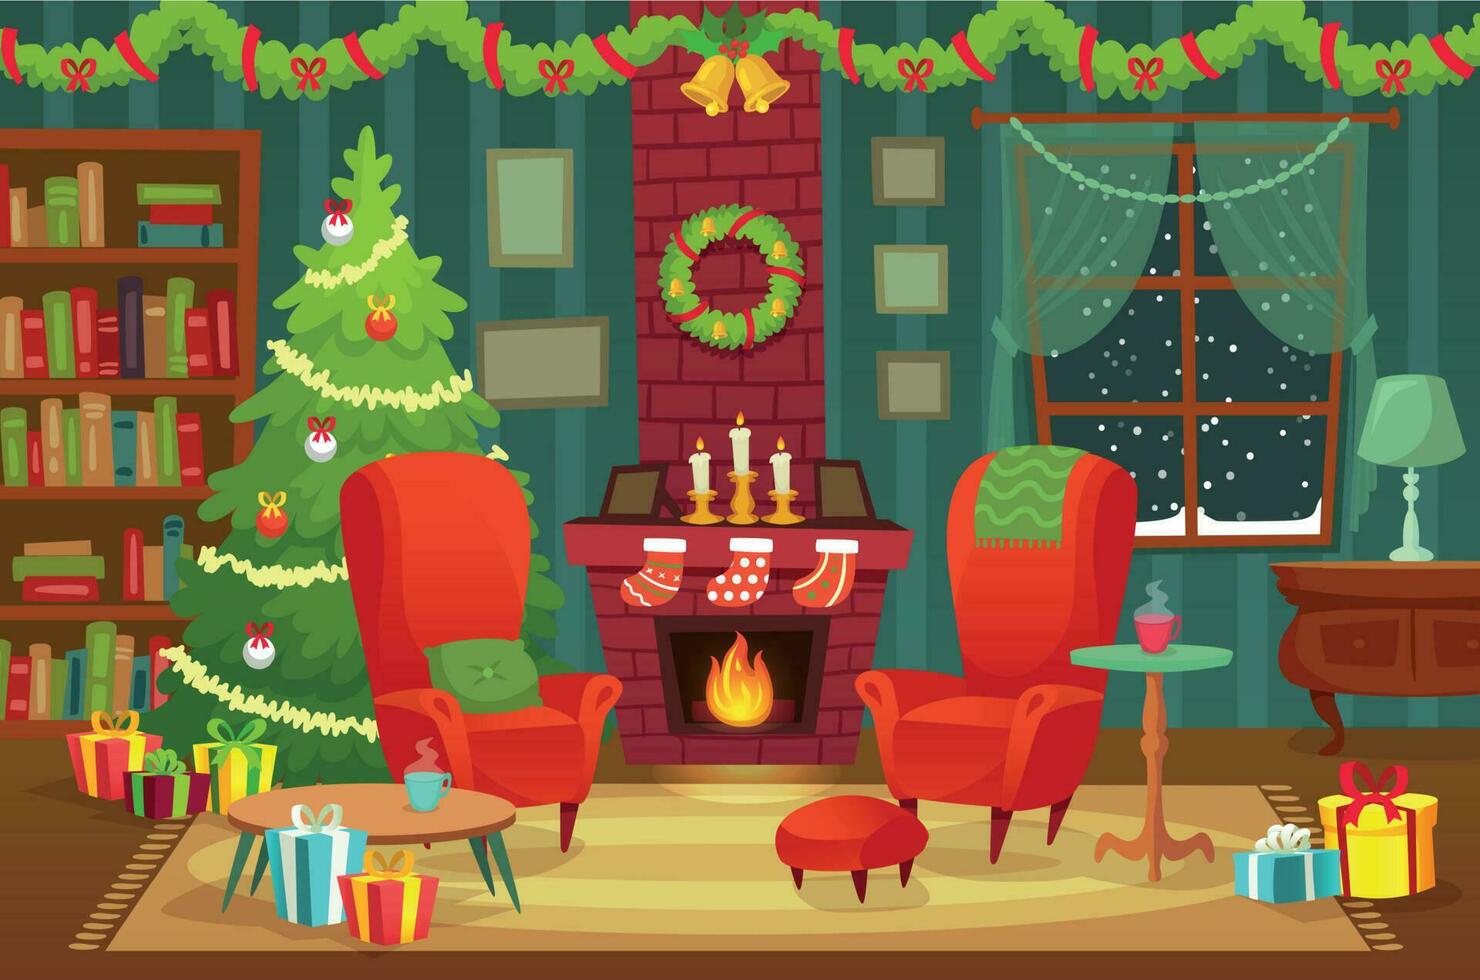 Decorated christmas room. Winter holiday interior decorations, armchair near fireplace and xmas tree vector background illustration